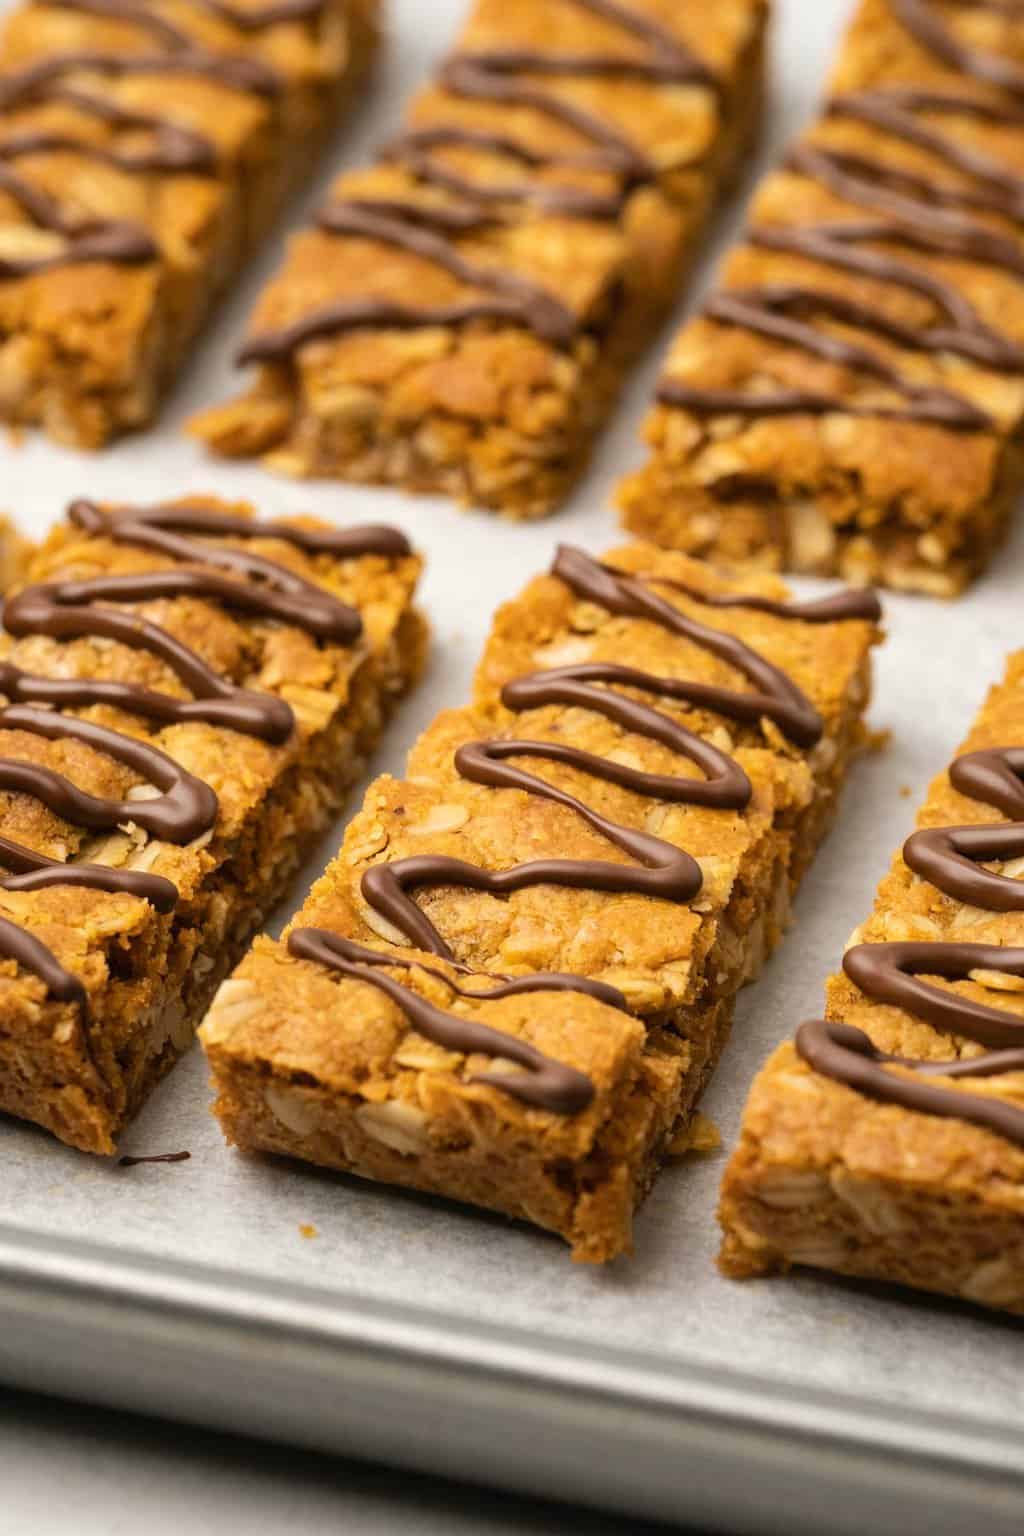 Oatmeal bars drizzled with chocolate on a parchment lined baking tray. 